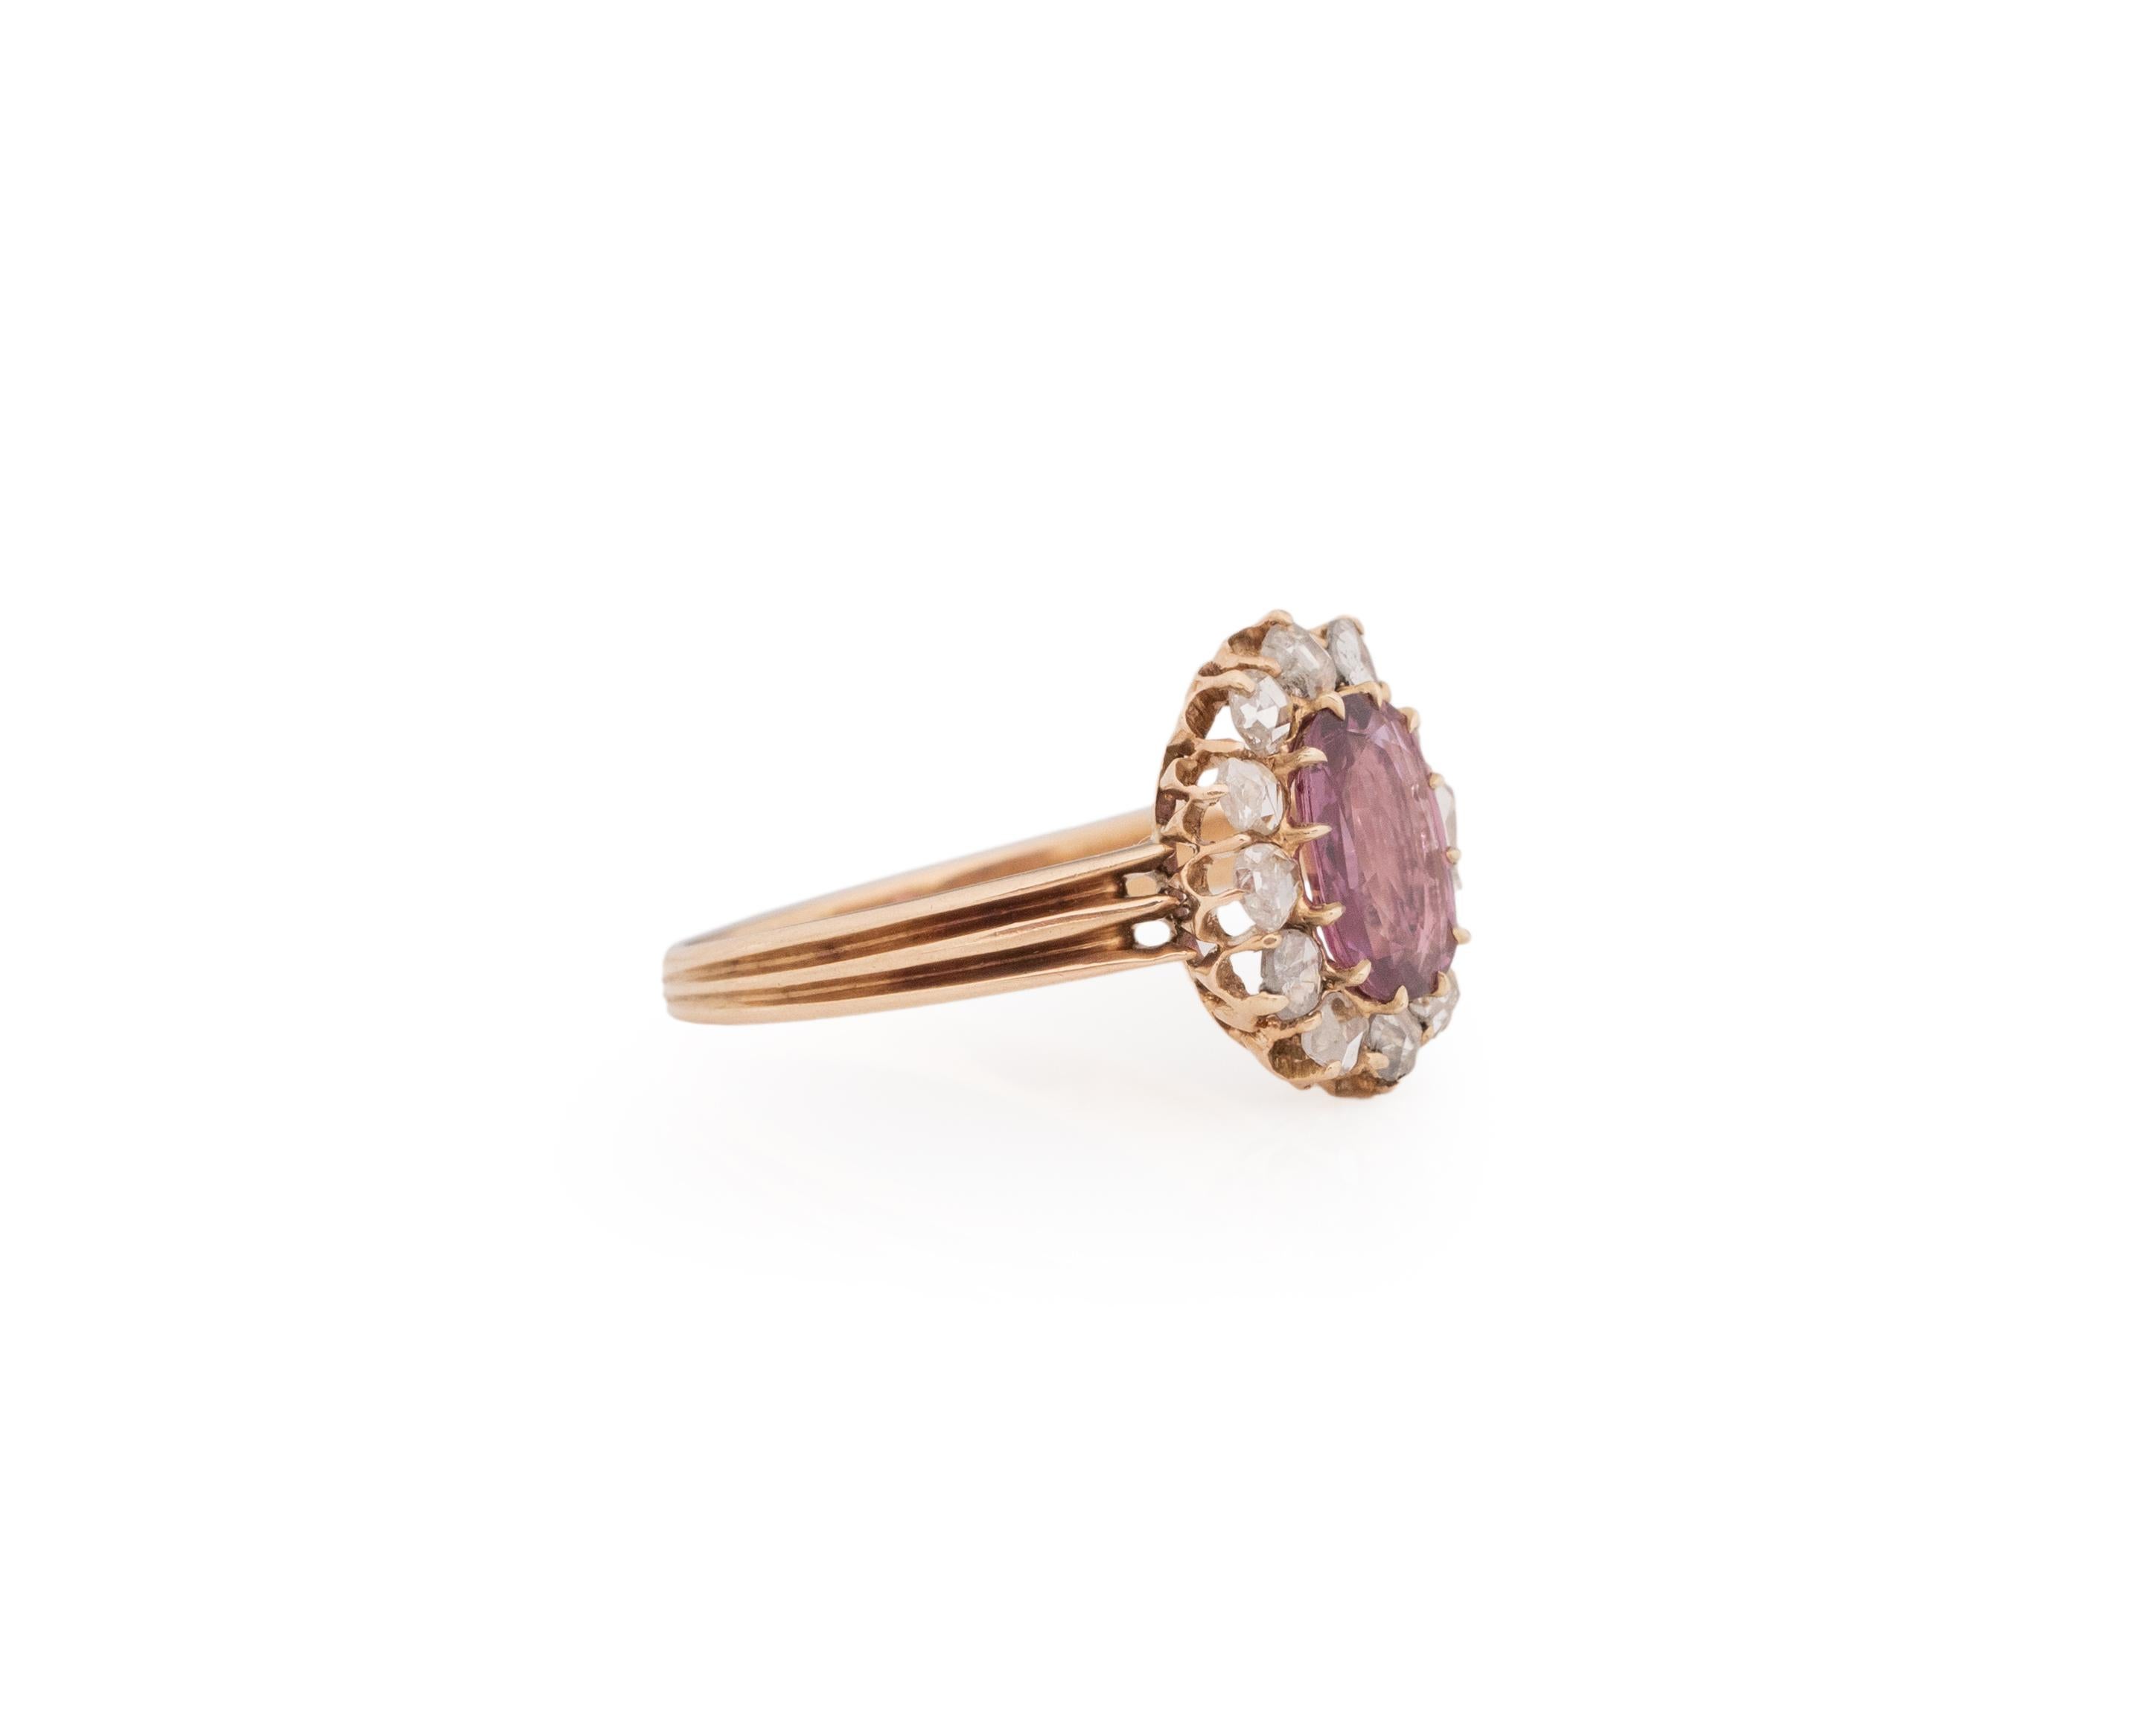 Ring Size: 8.5
Metal Type: 14K Rose Gold [Hallmarked, and Tested]
Weight: 3.6 grams

Center SAPPHIRE Details:
GIA REPORT #:5221548652
Weight: 1.36ct
Cut: Antique Oval Cut
Color: Intense Purplish Pink
Clarity: VS
Measurements: 8.93mm x 6.32mm x